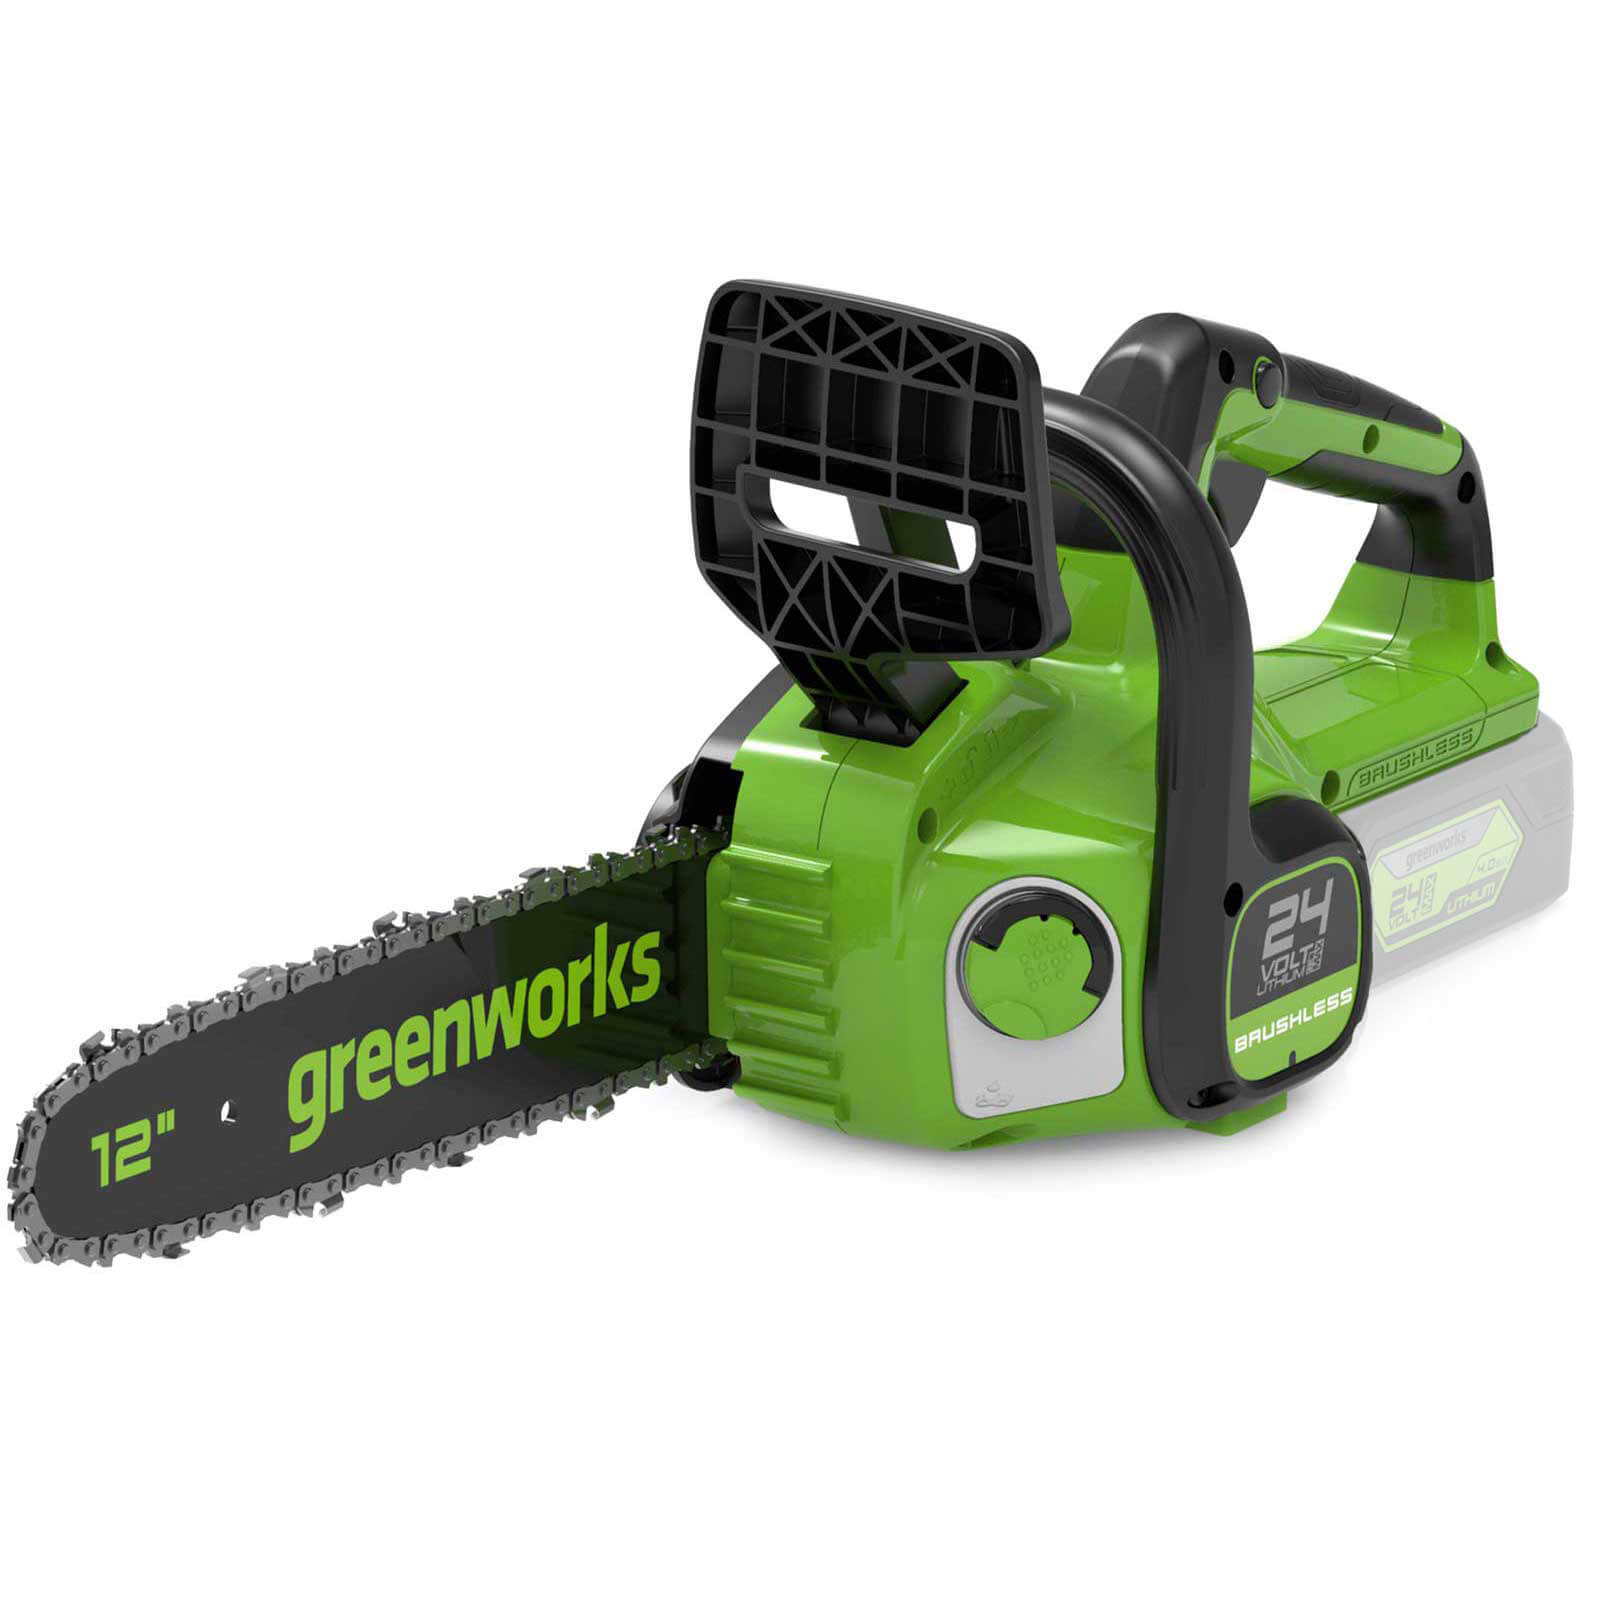 Image of Greenworks GD24CS30 24v Cordless Brushless Chainsaw 300mm No Batteries No Charger